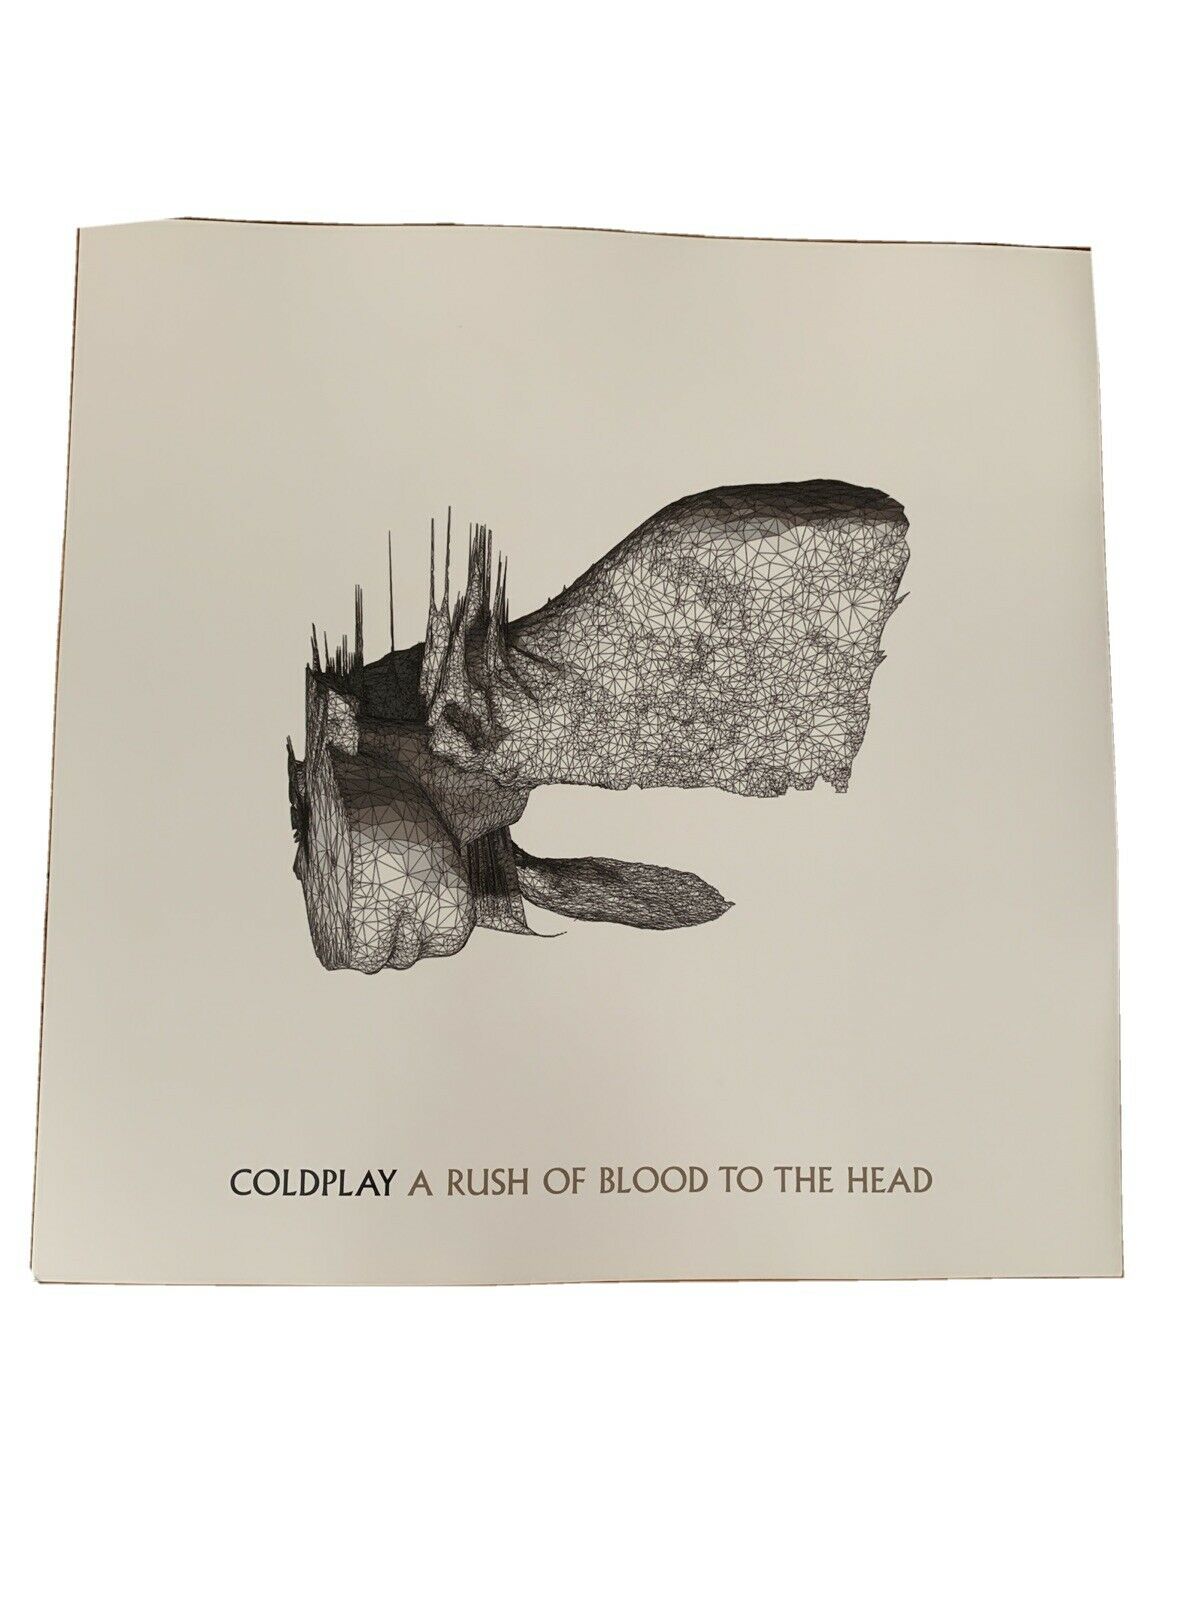 Coldplay - Promotional 12” X 12” Card (flat Poster - A Rush Of Blood To The Head